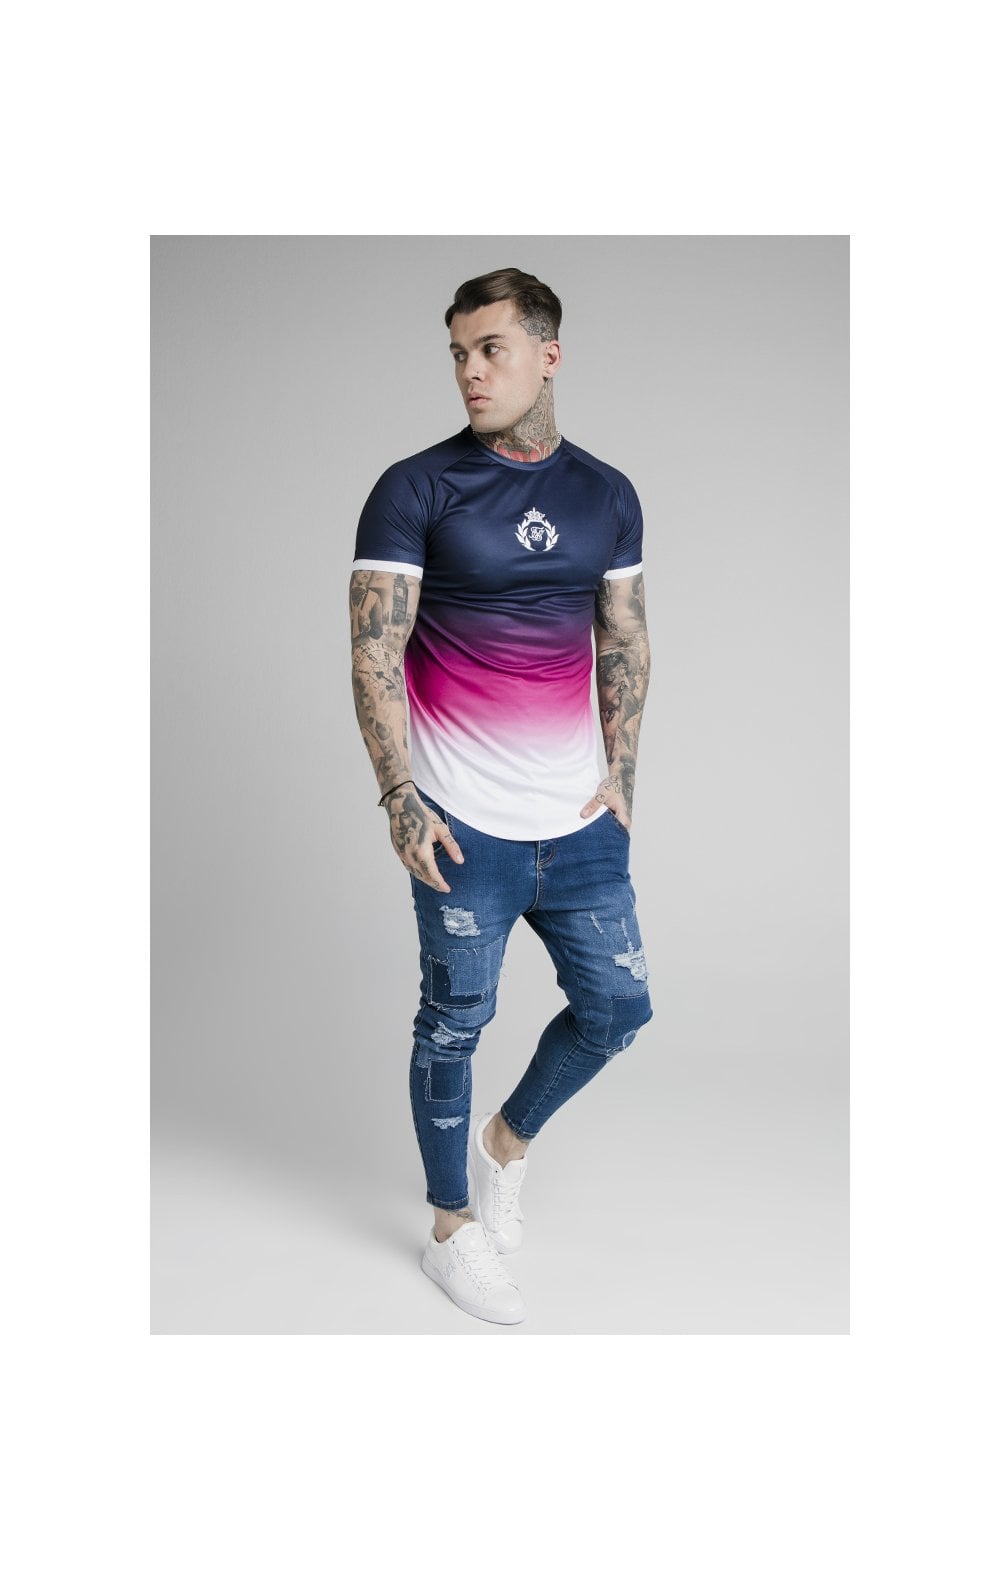 SikSilk S/S Inset Cuff Fade Tech Tee - Navy,Pink & White (3)